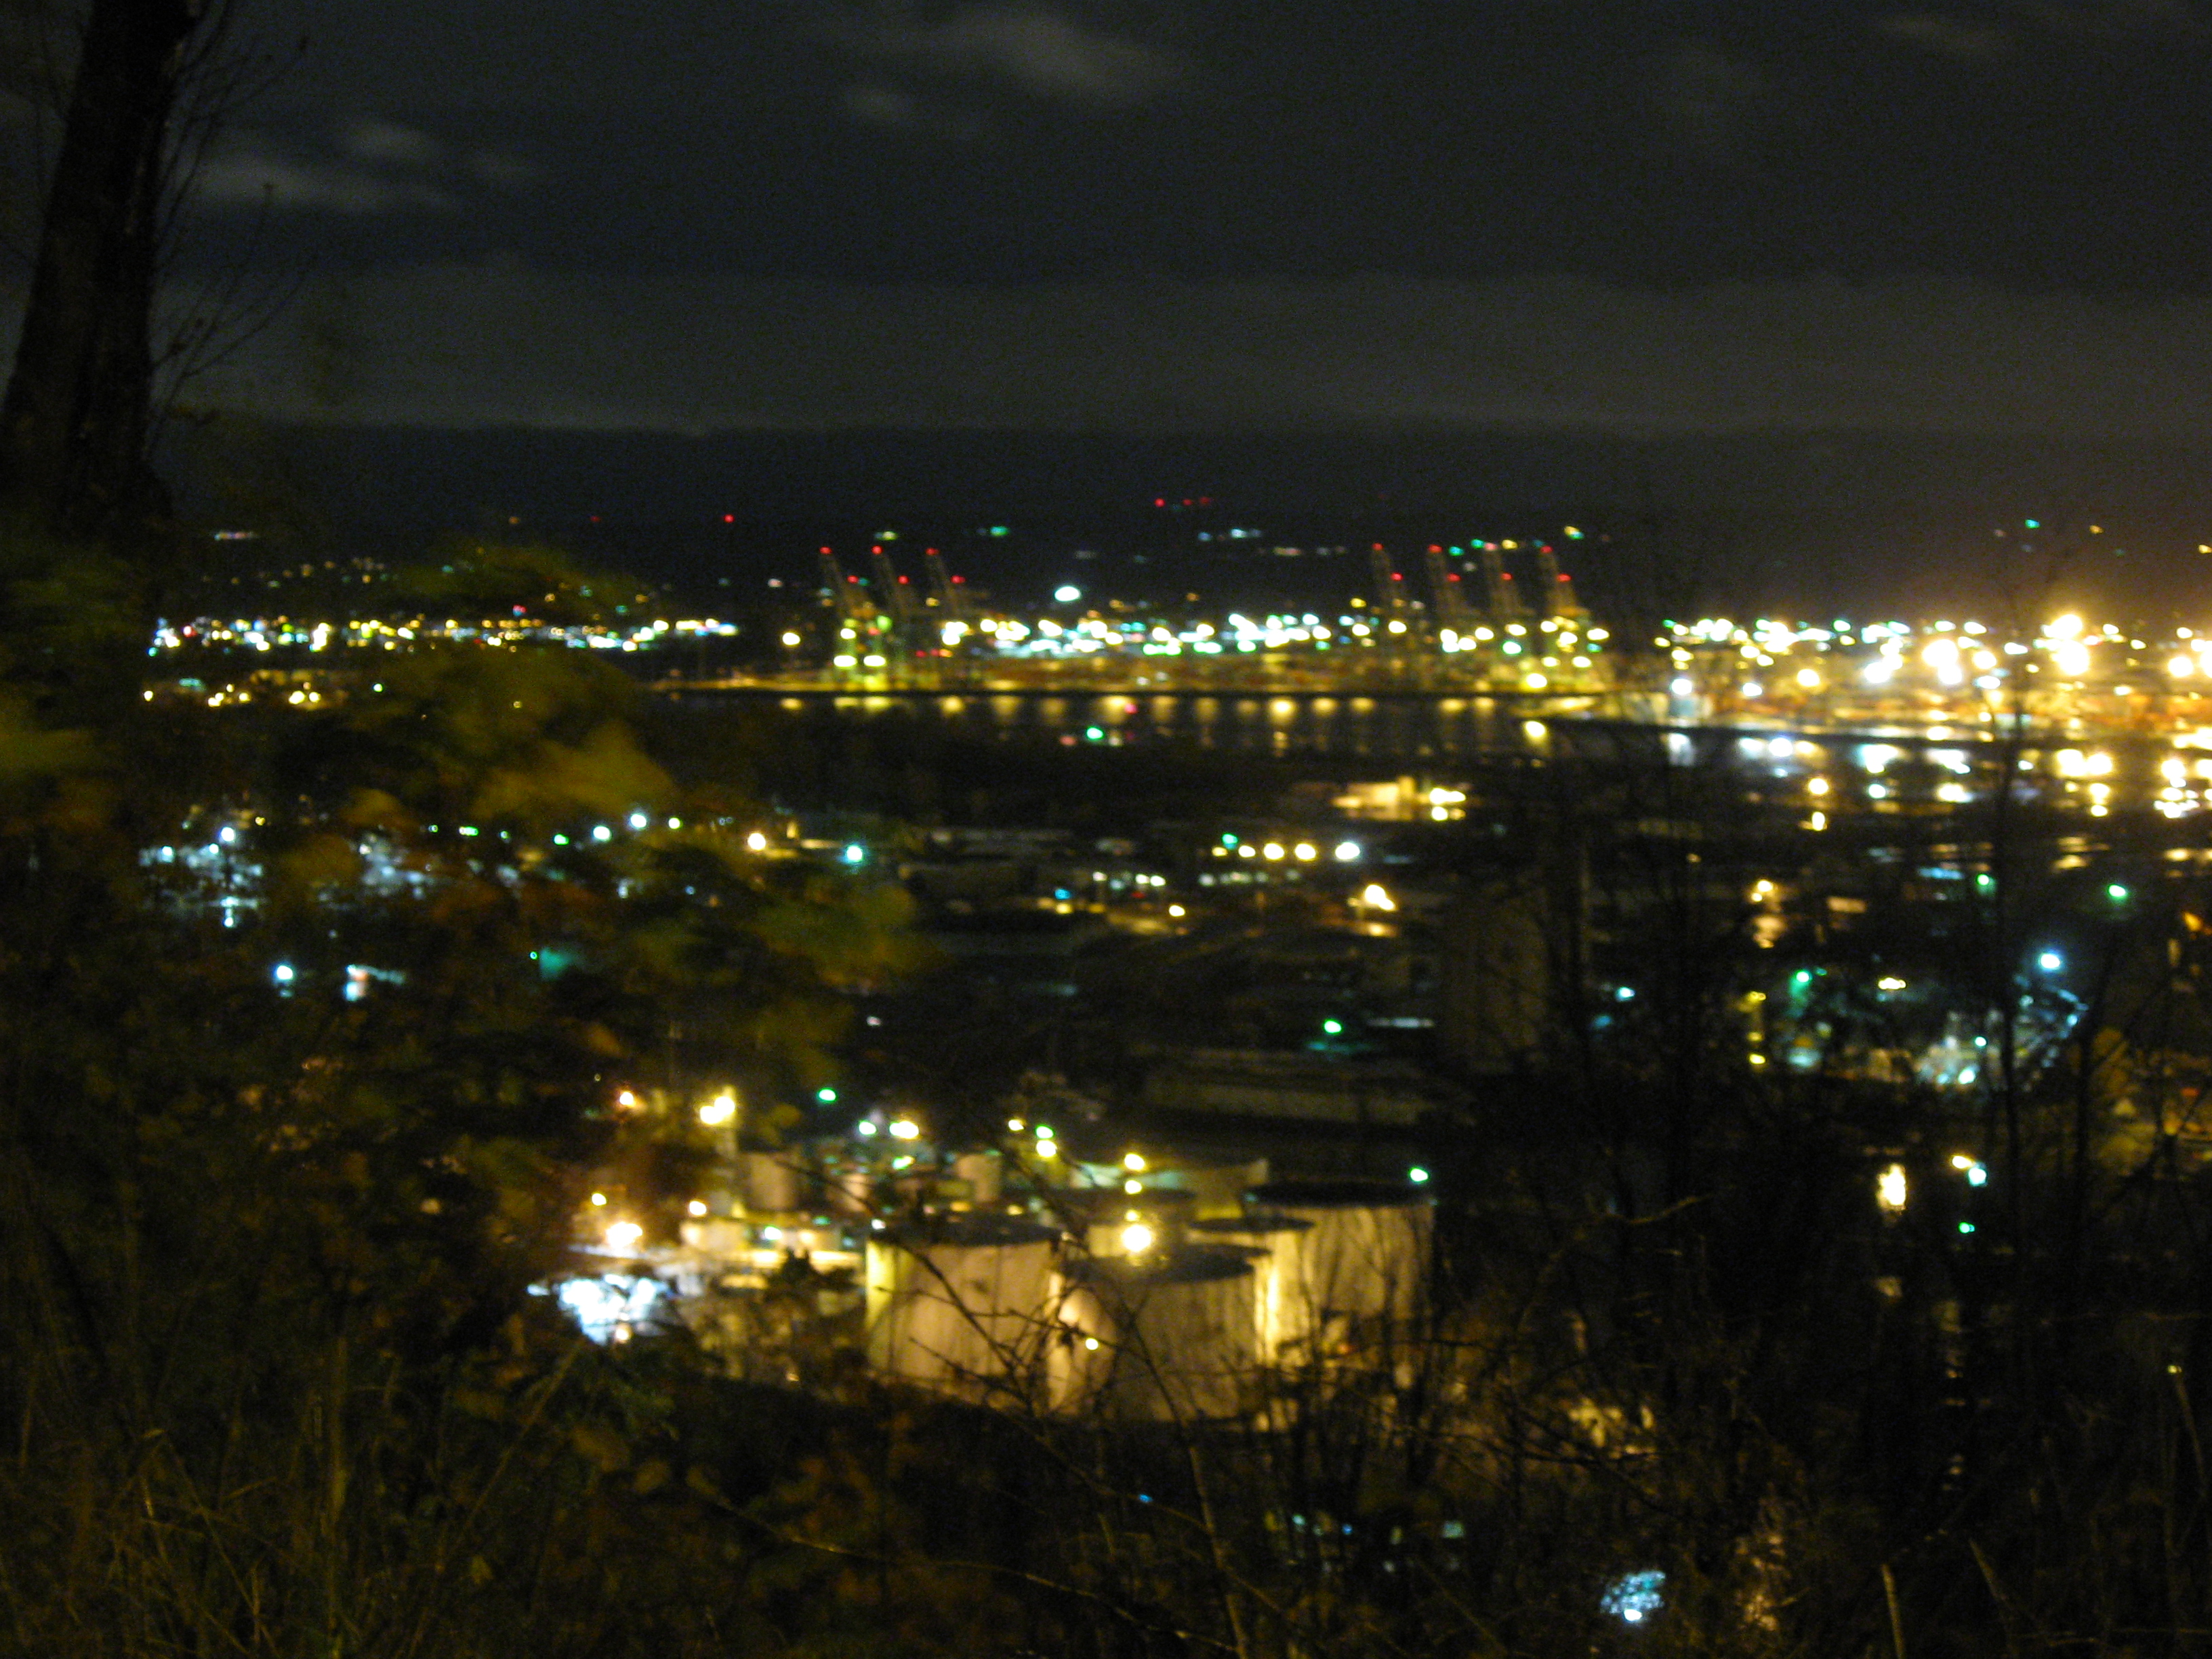 City from hillside near missy's place at night 7 photo